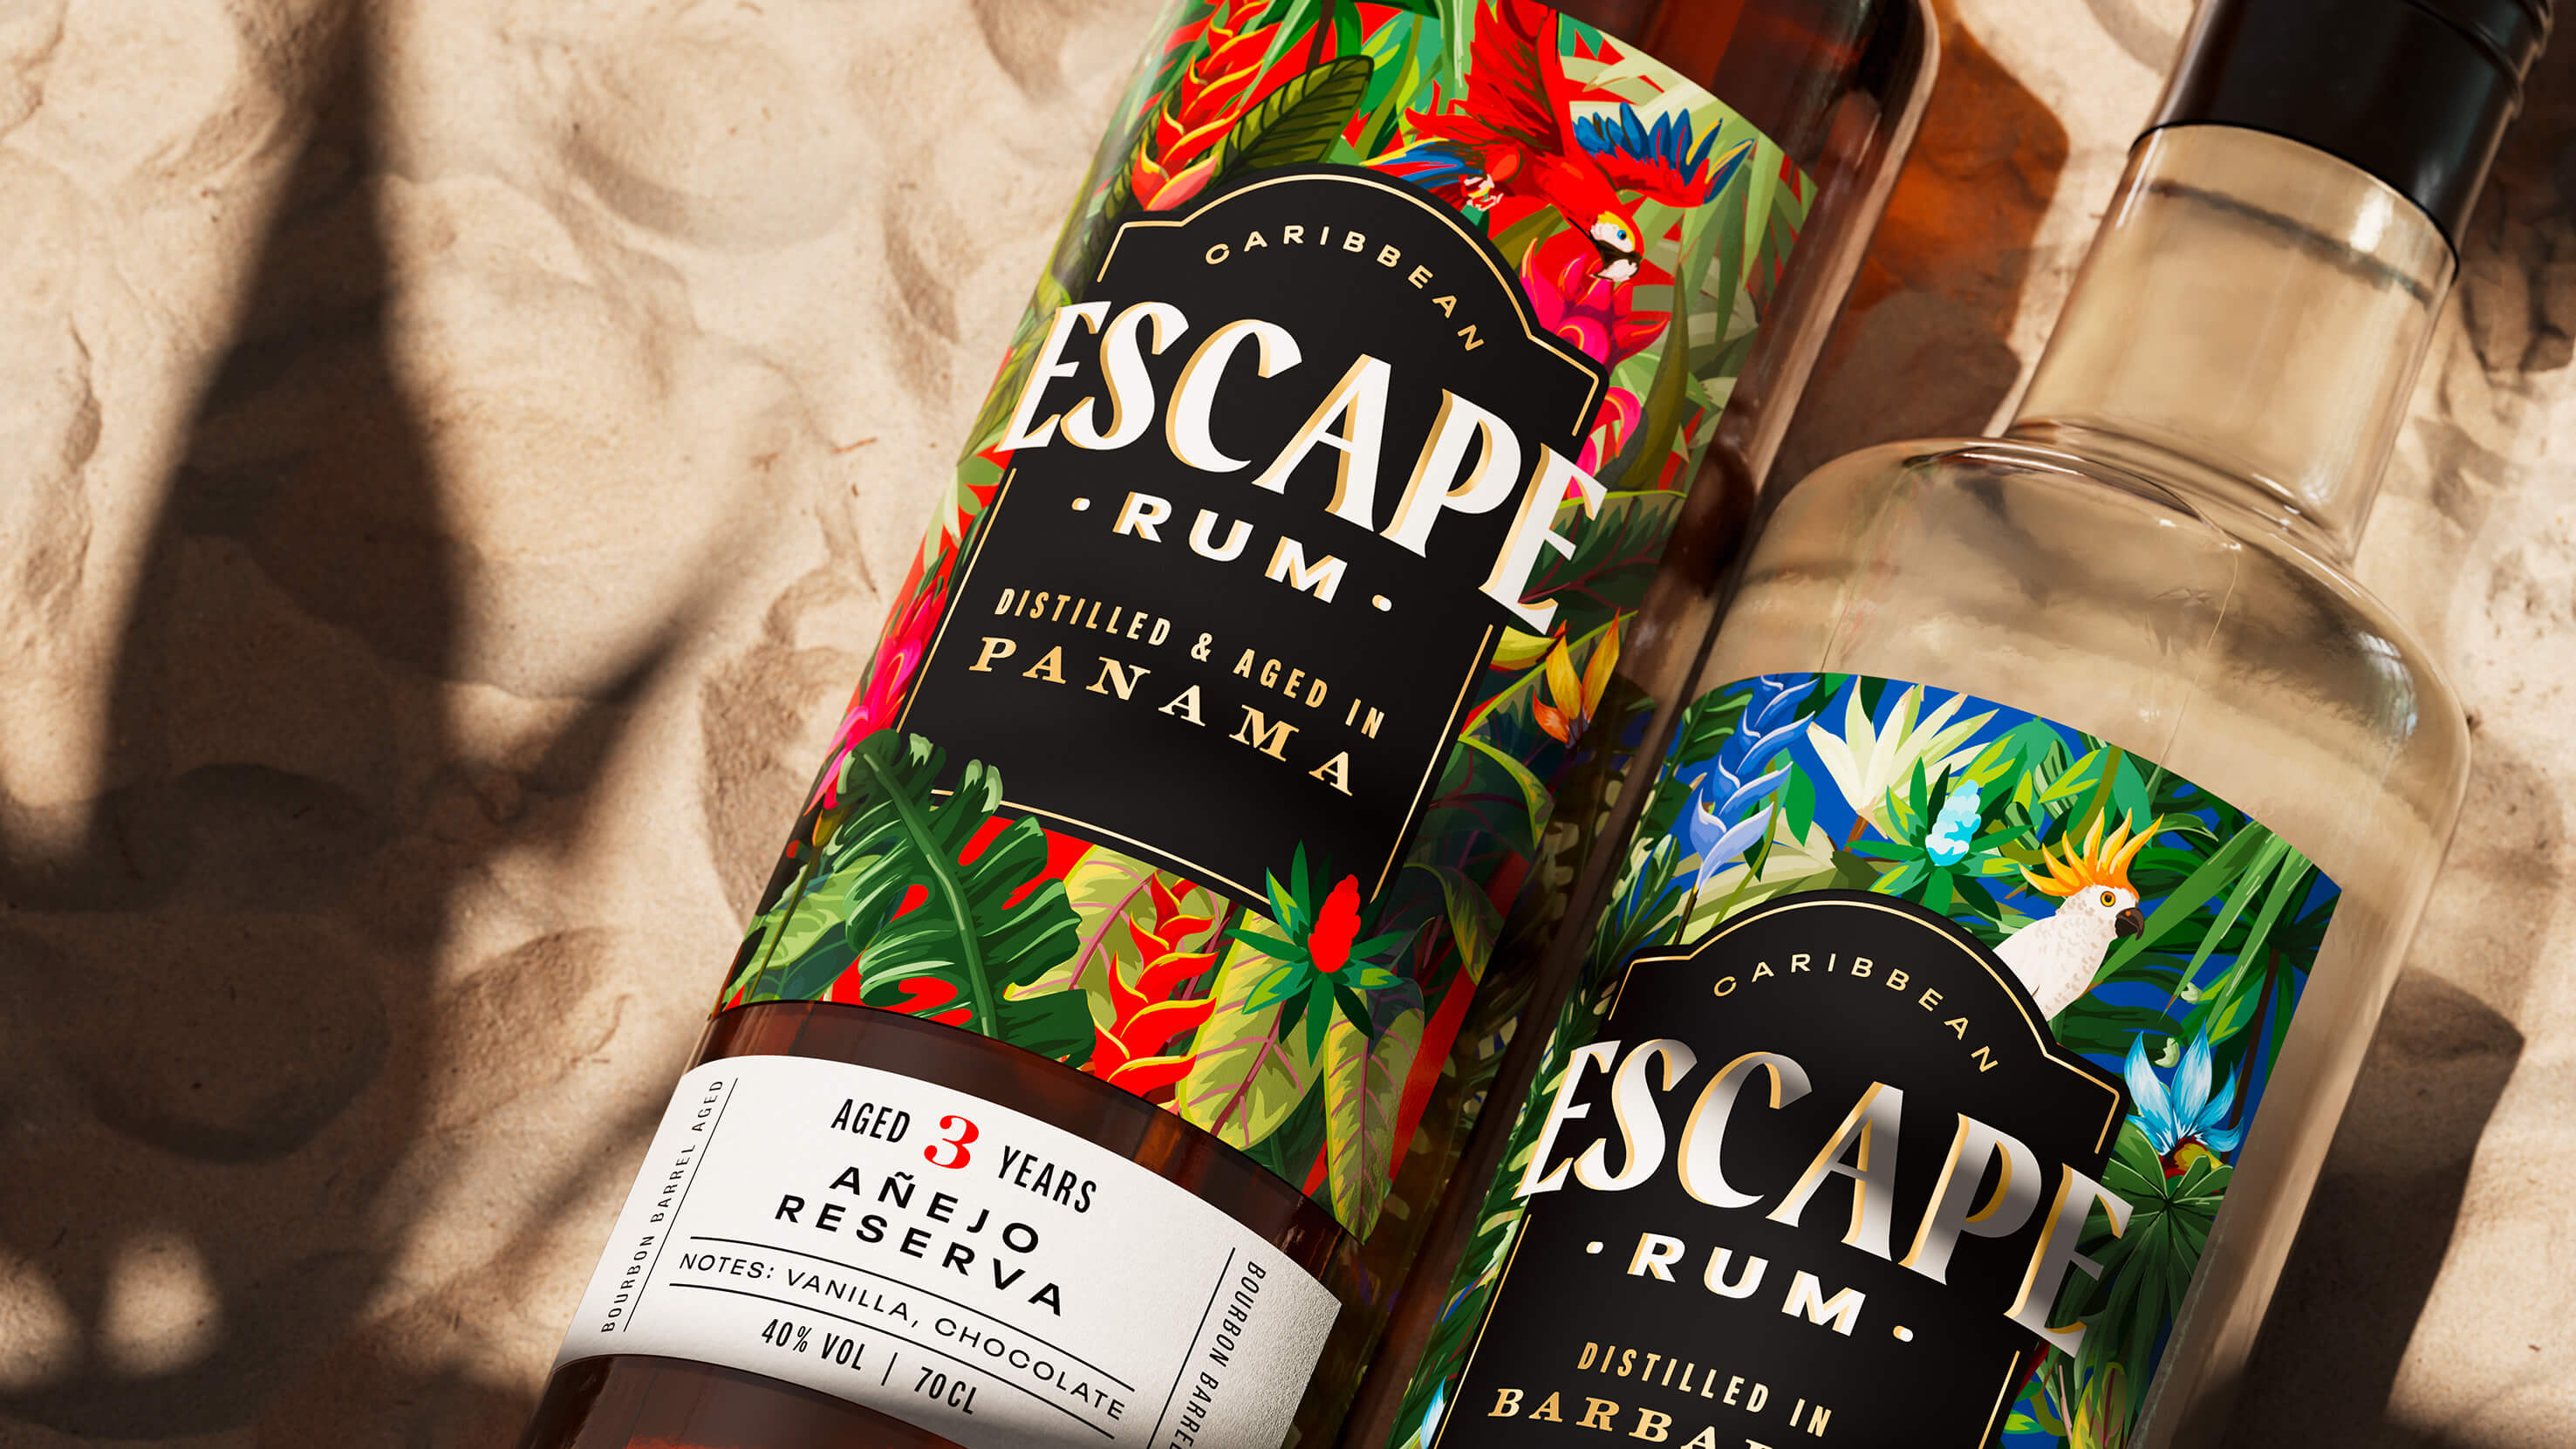 Win Creating Images Created Diwisa’s Escape Rum Brand and Packaging Design Relaunch